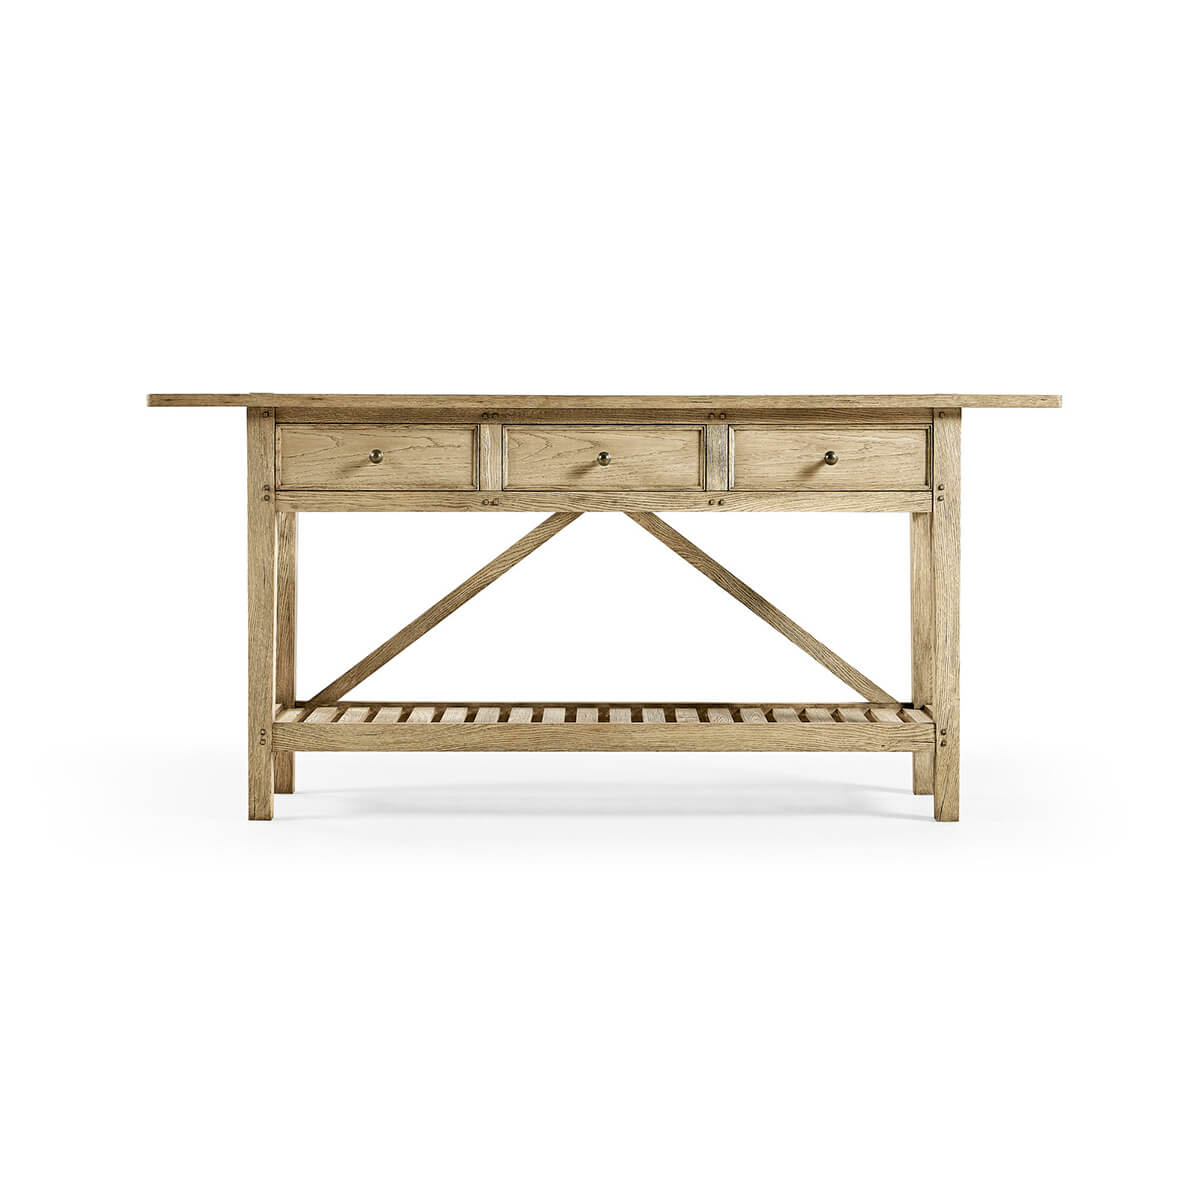 French Country Farmhouse Console Table - English Georgian America